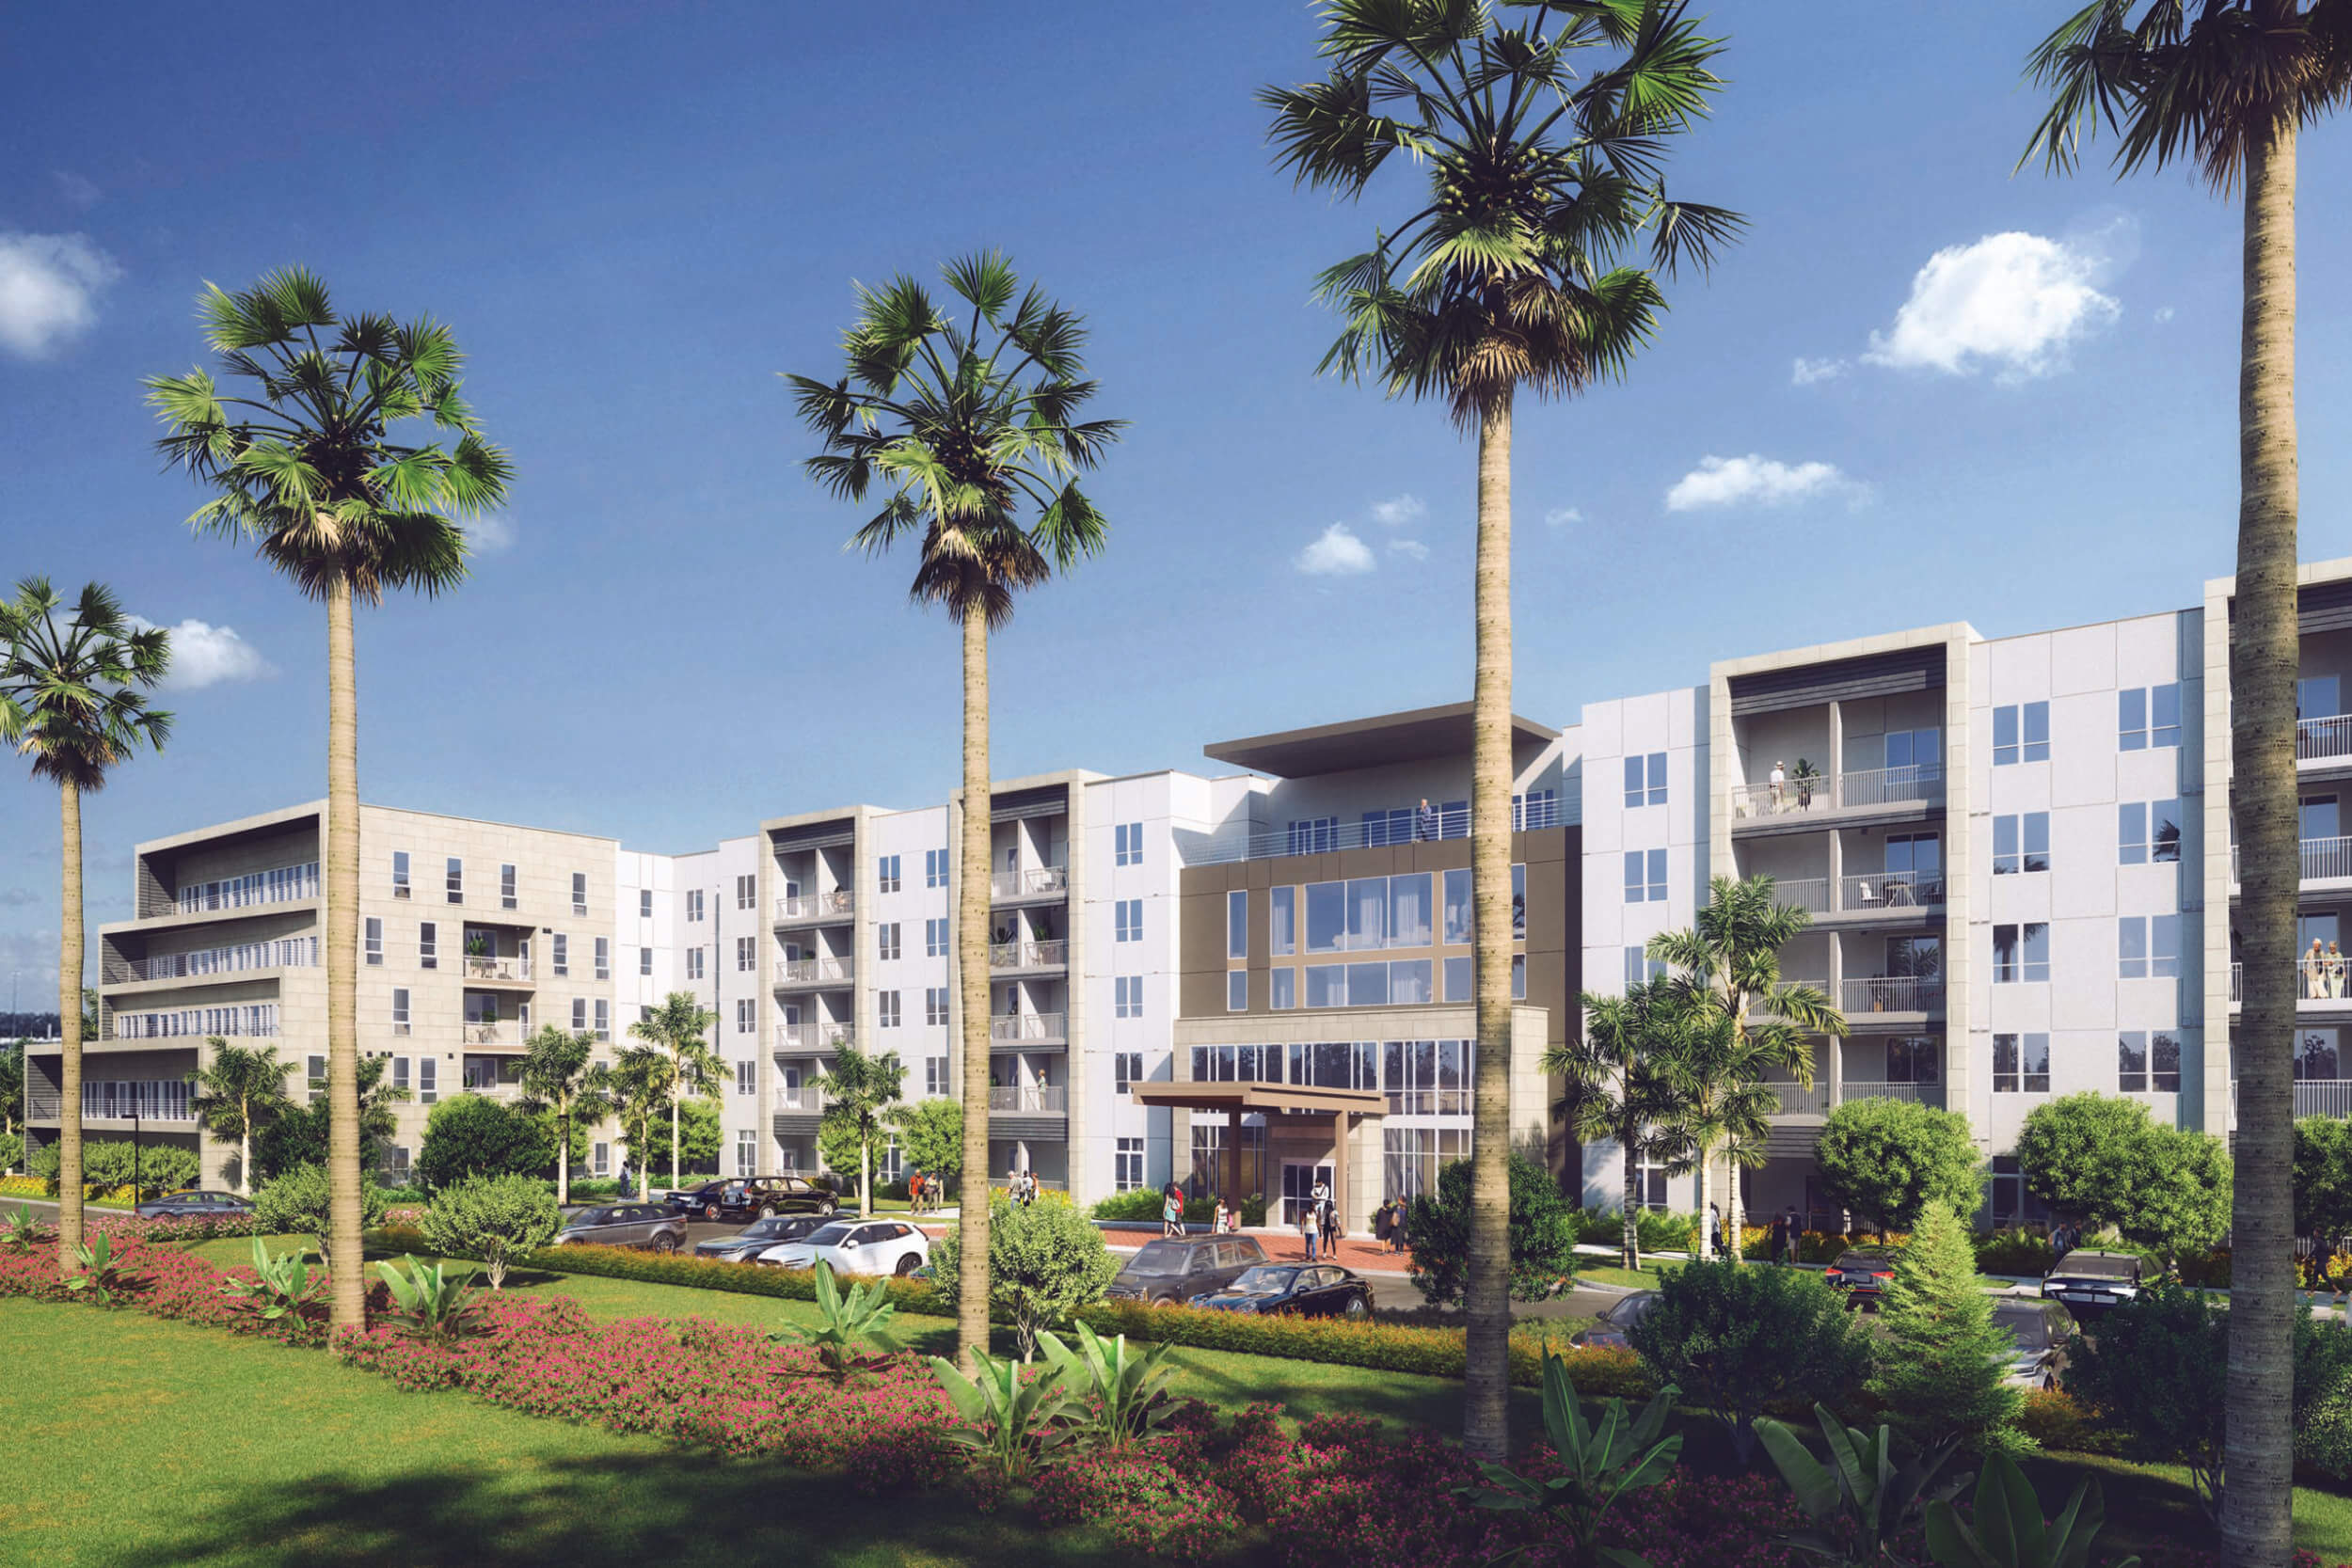 Rendering of exterior of The Gallery at Cape Coral independent living community with palm trees and parking lot in front of white and brown building